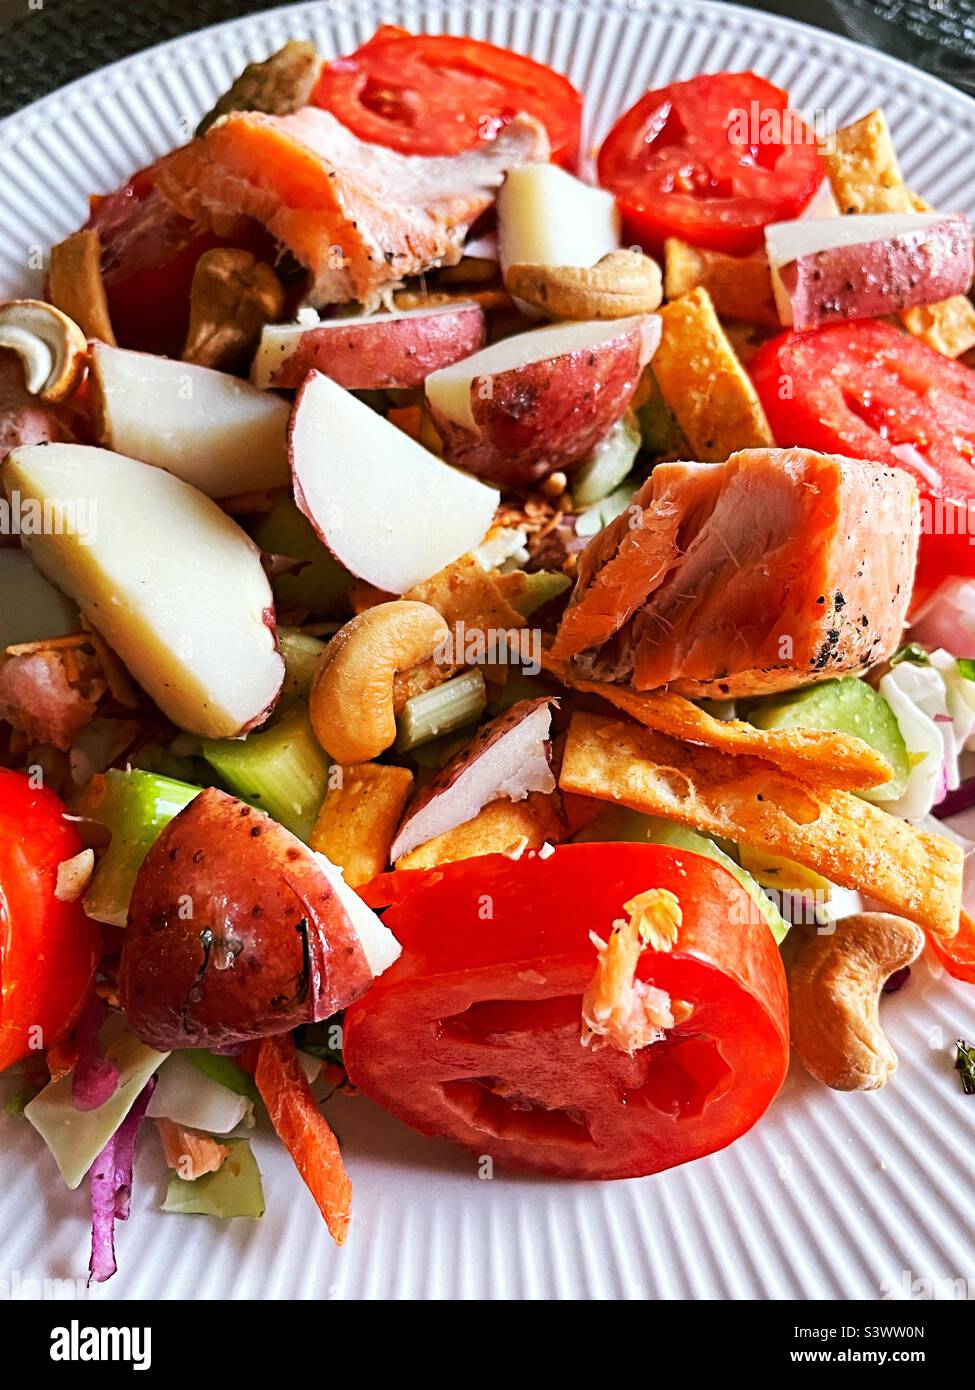 Close-up of a gourmet salmon and new potato salad featuring heirloom tomatoes, 2022, USA Stock Photo